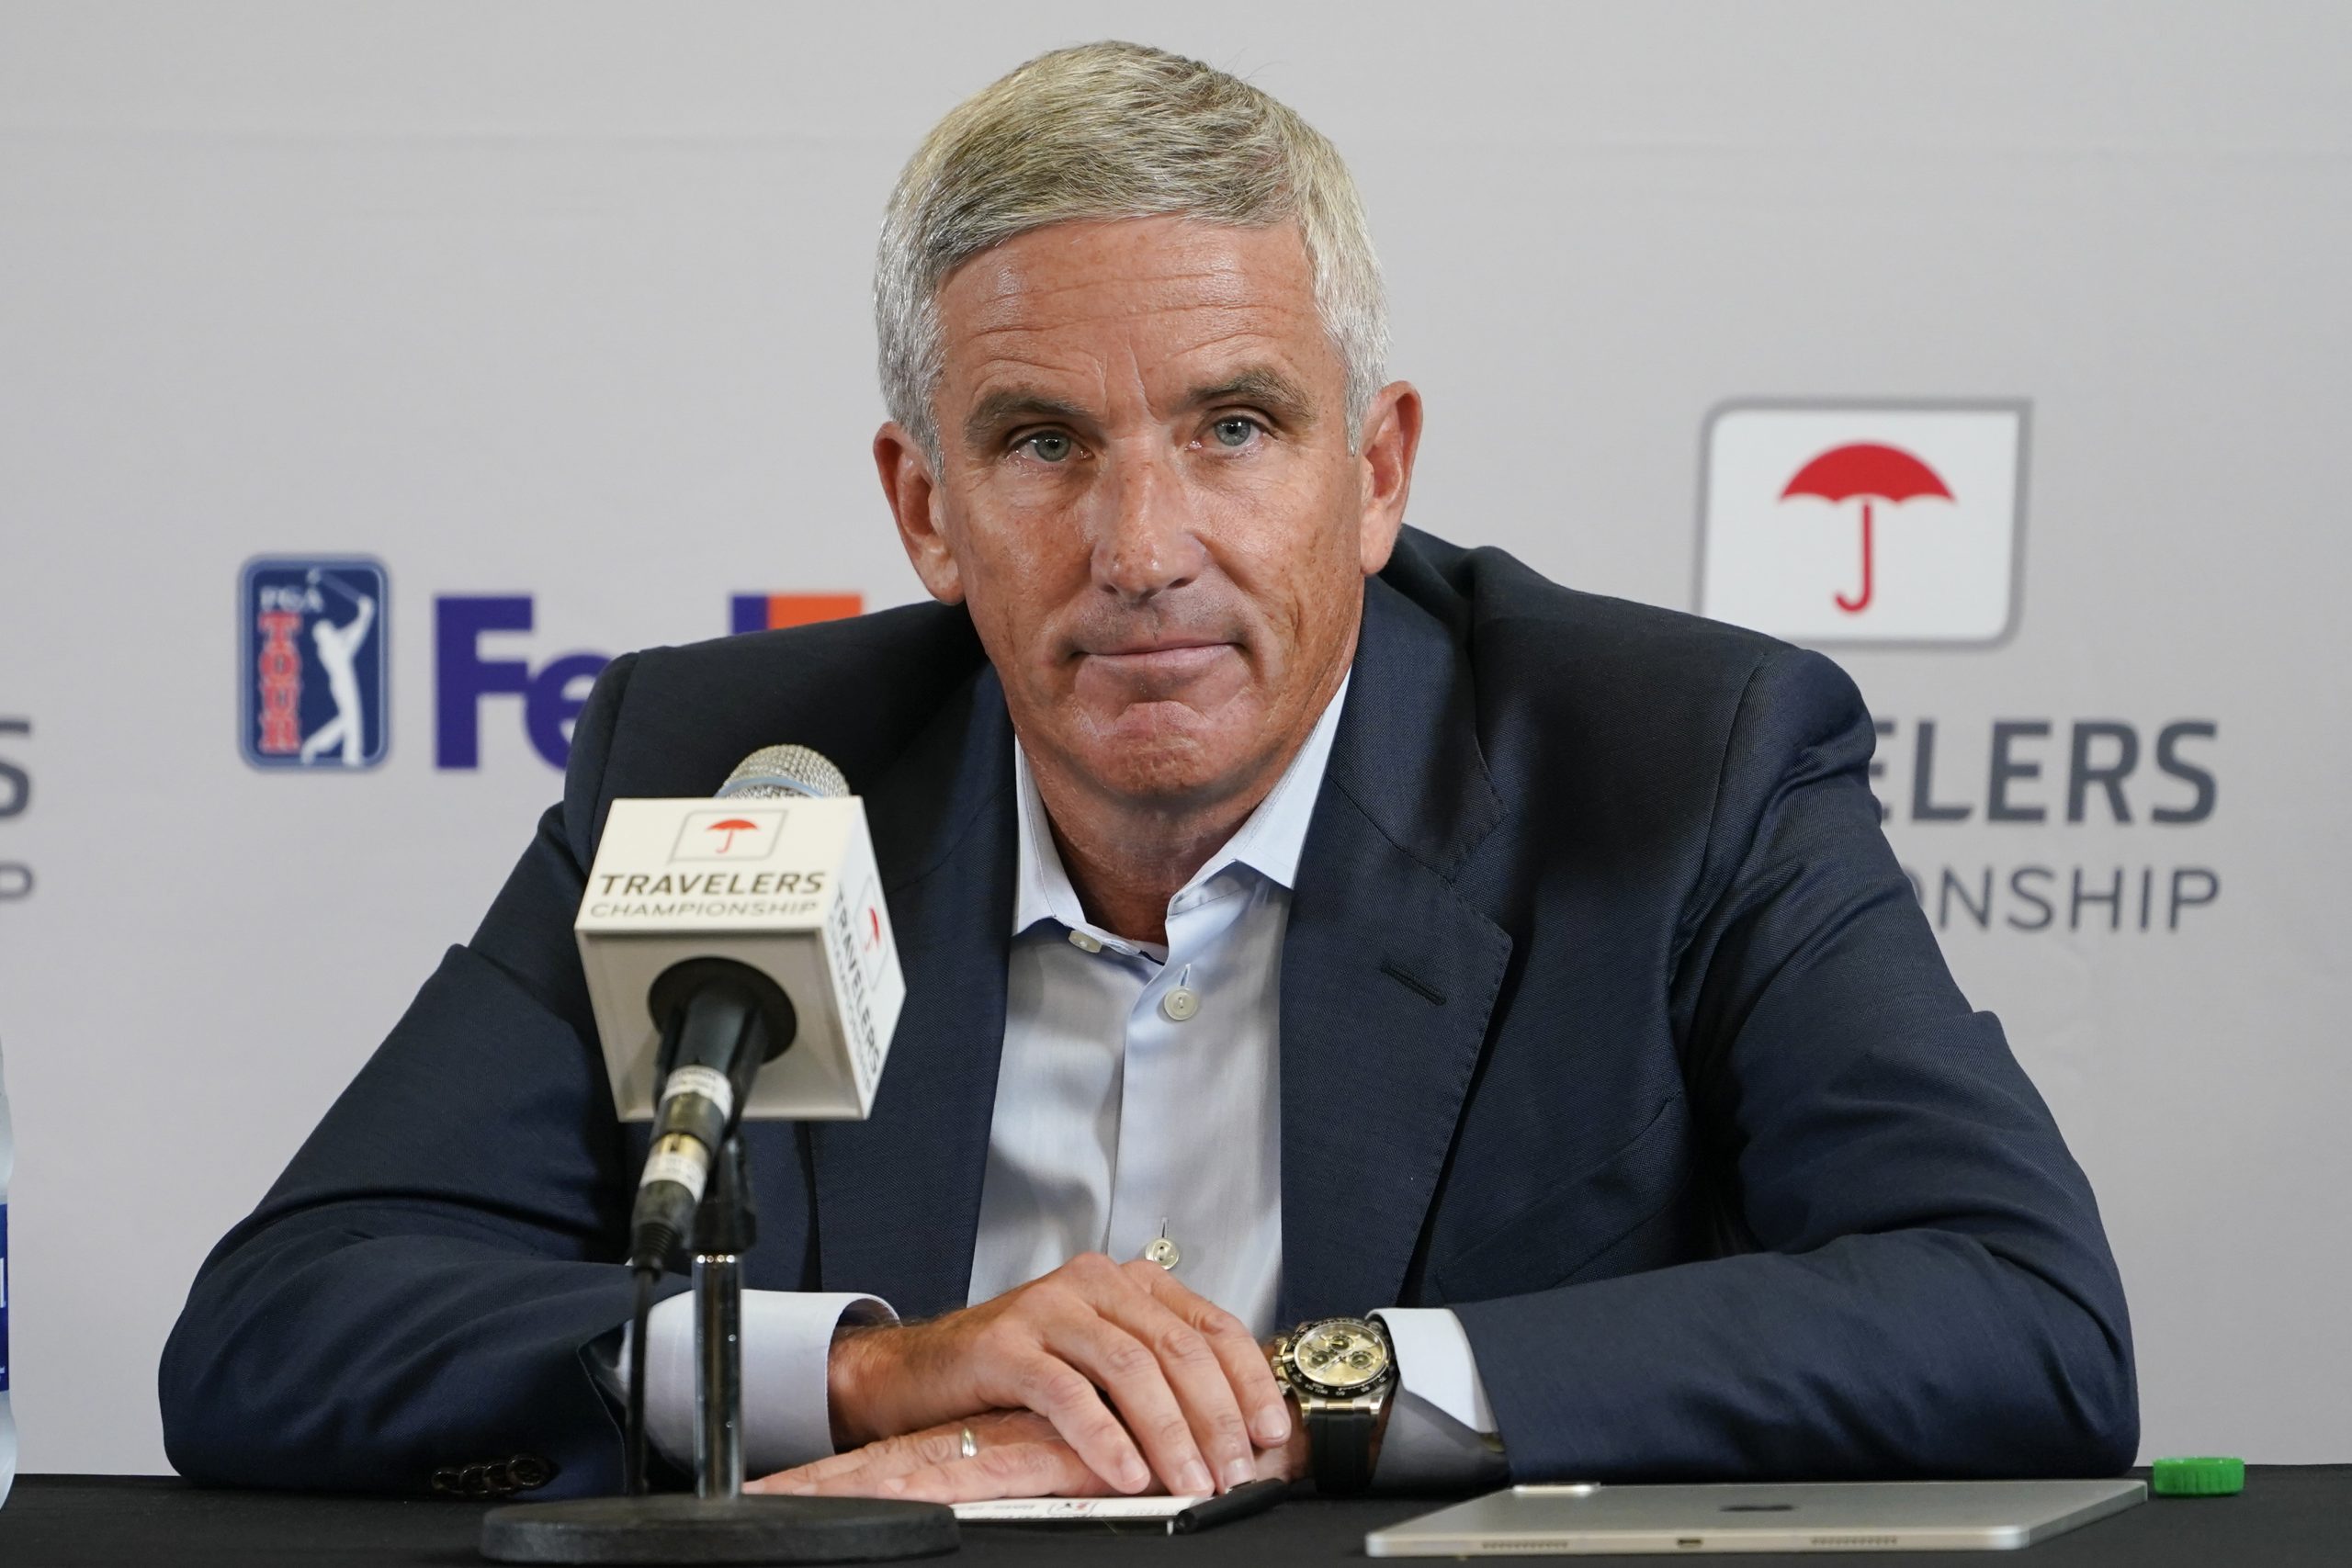 PGA Tour commissioner Jay Monahan ‘recuperating’ from medical issue